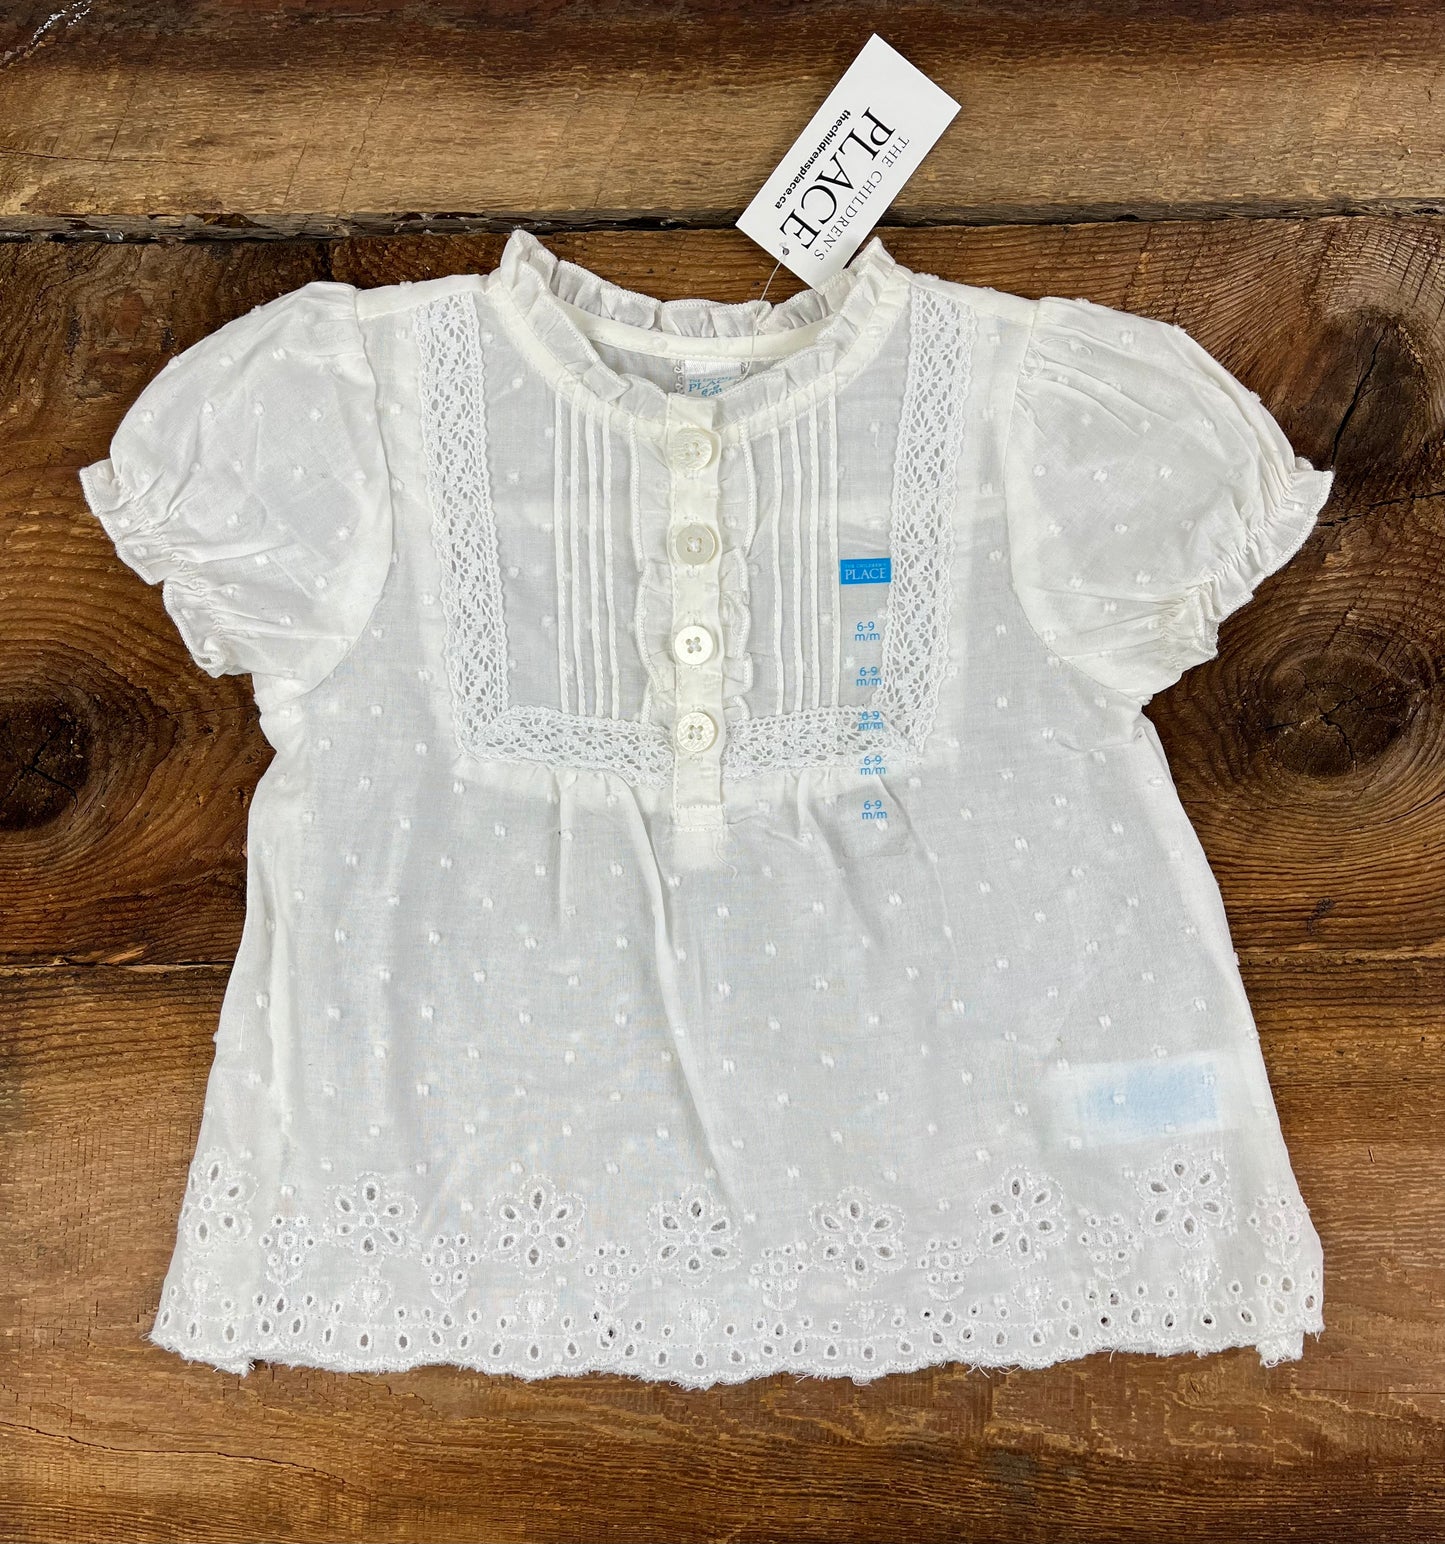 The Children’s Place Eyelet Lace Tee